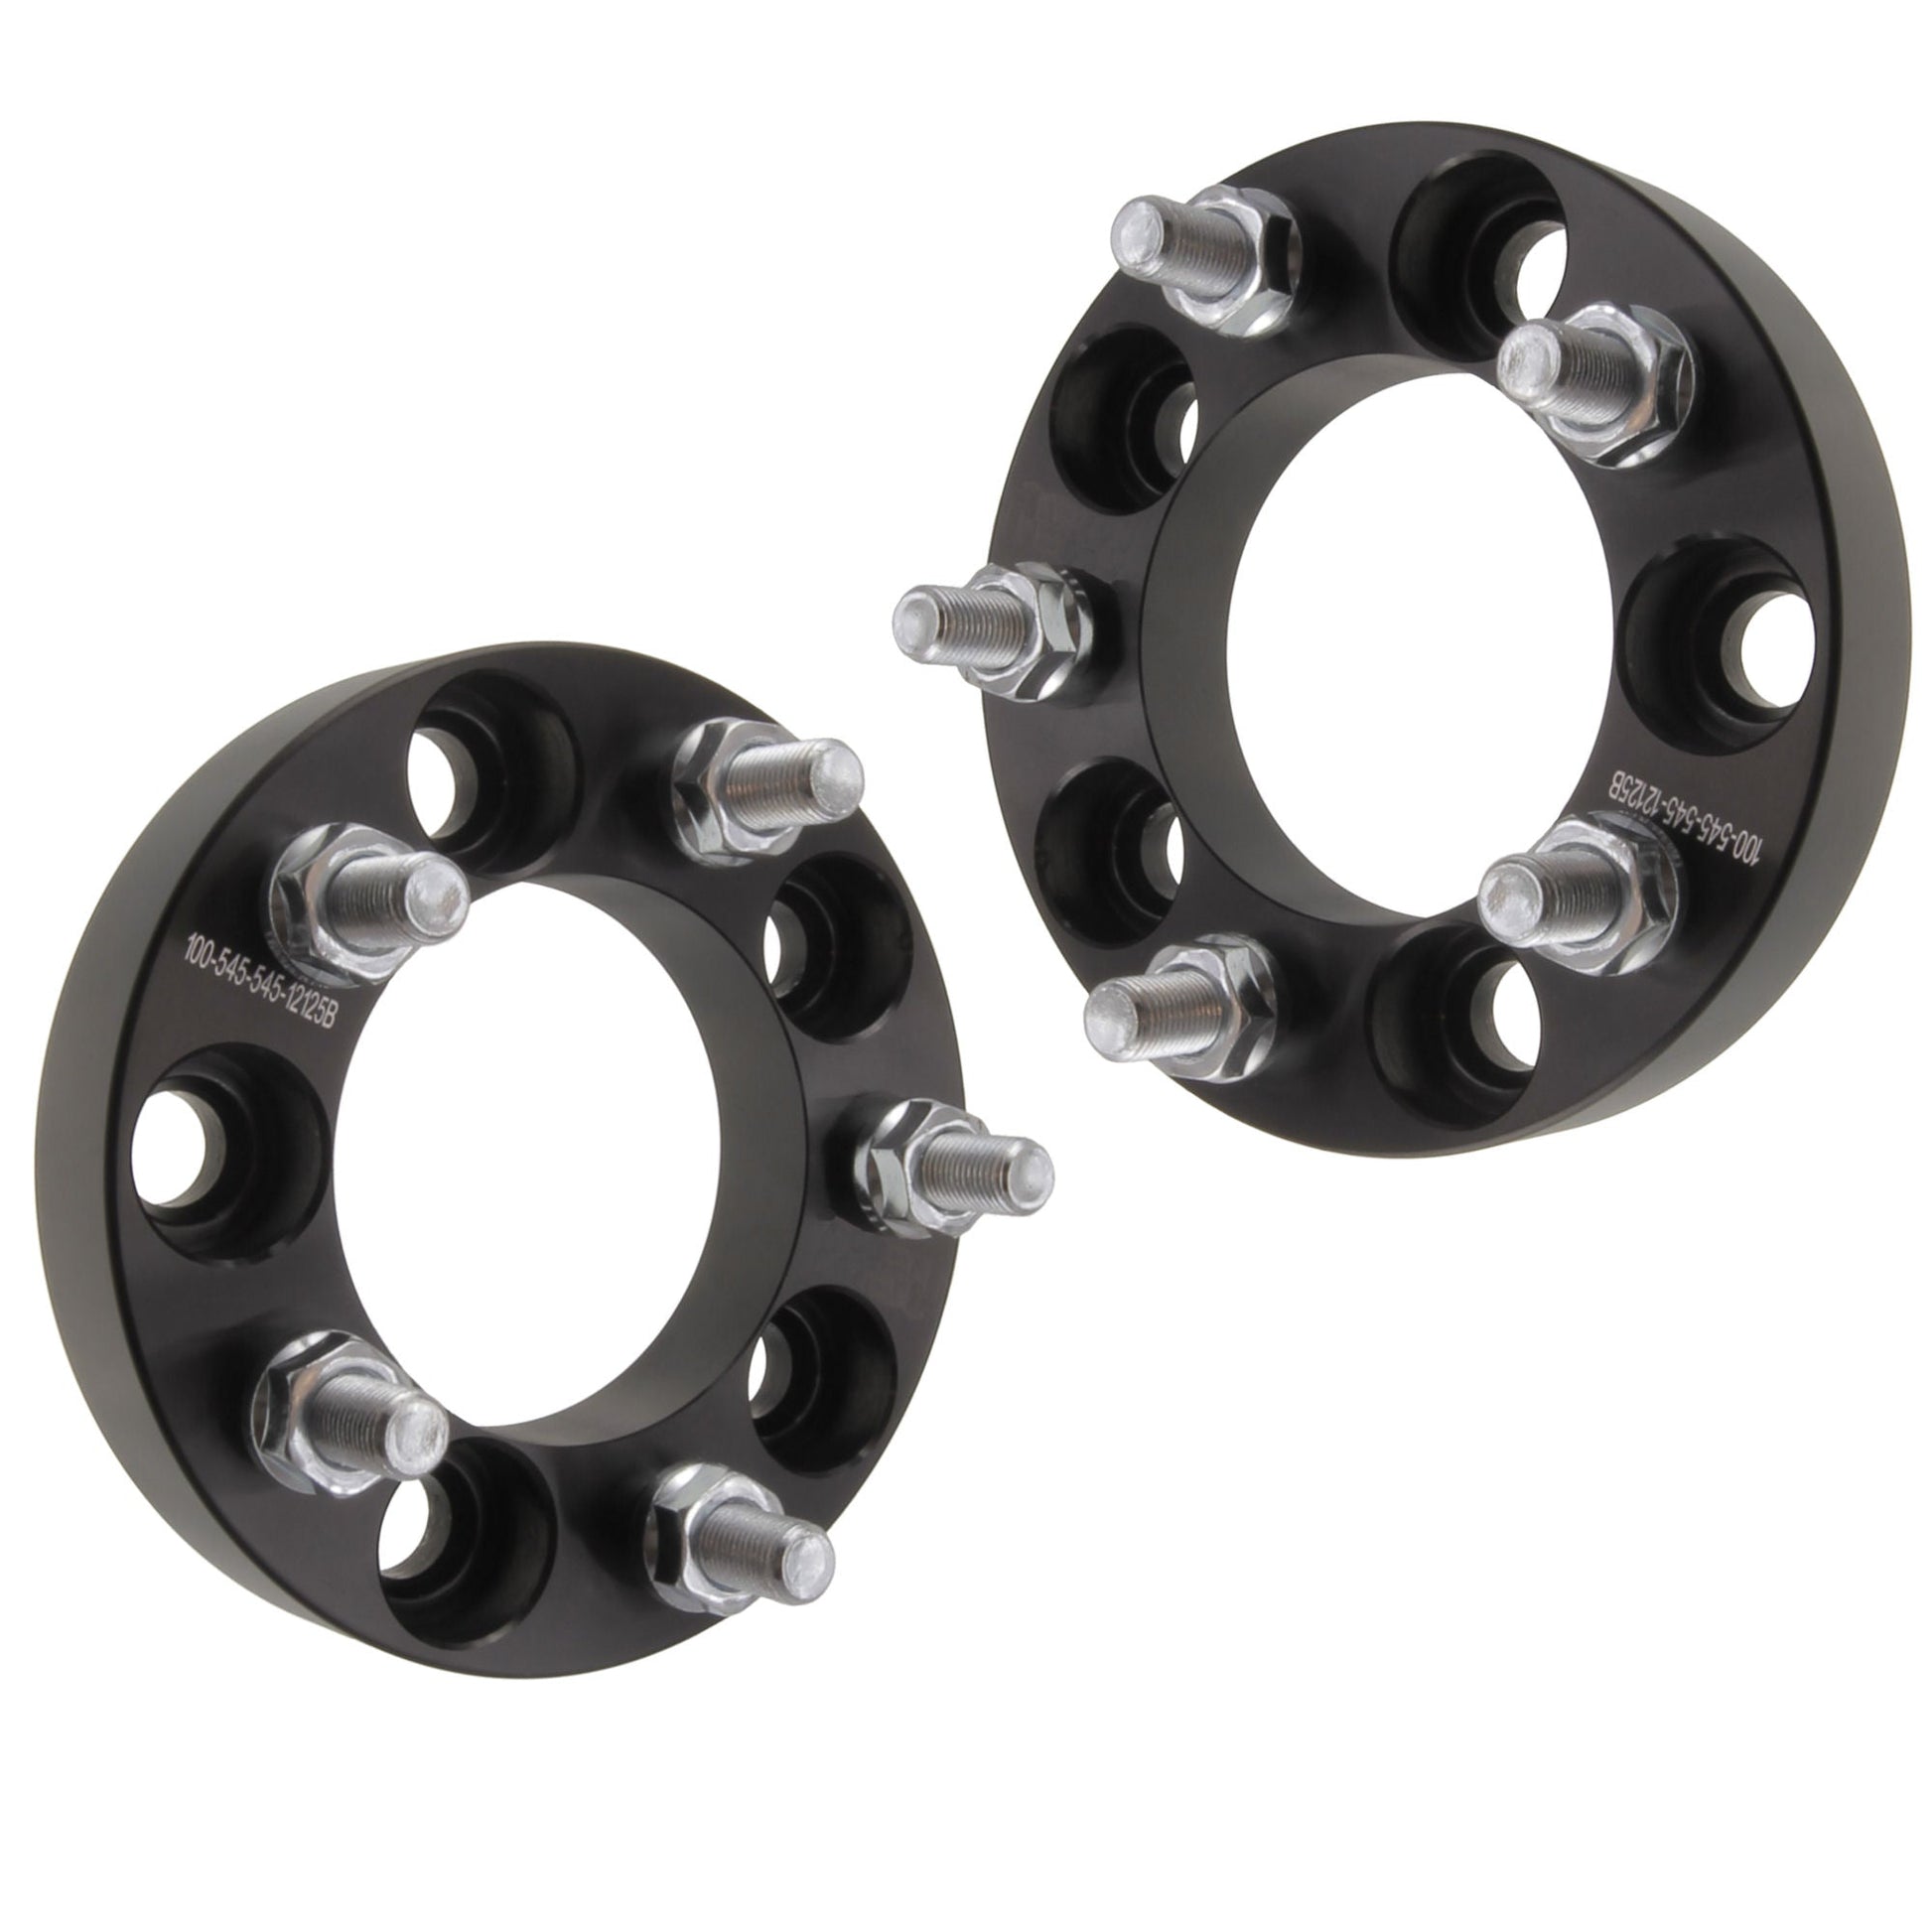 1" (25mm) Titan Wheel Spacers for Ford Mustang Ranger Explorer | 5x4.5 | 1/2x20 Studs | Set of 4 | Titan Wheel Accessories